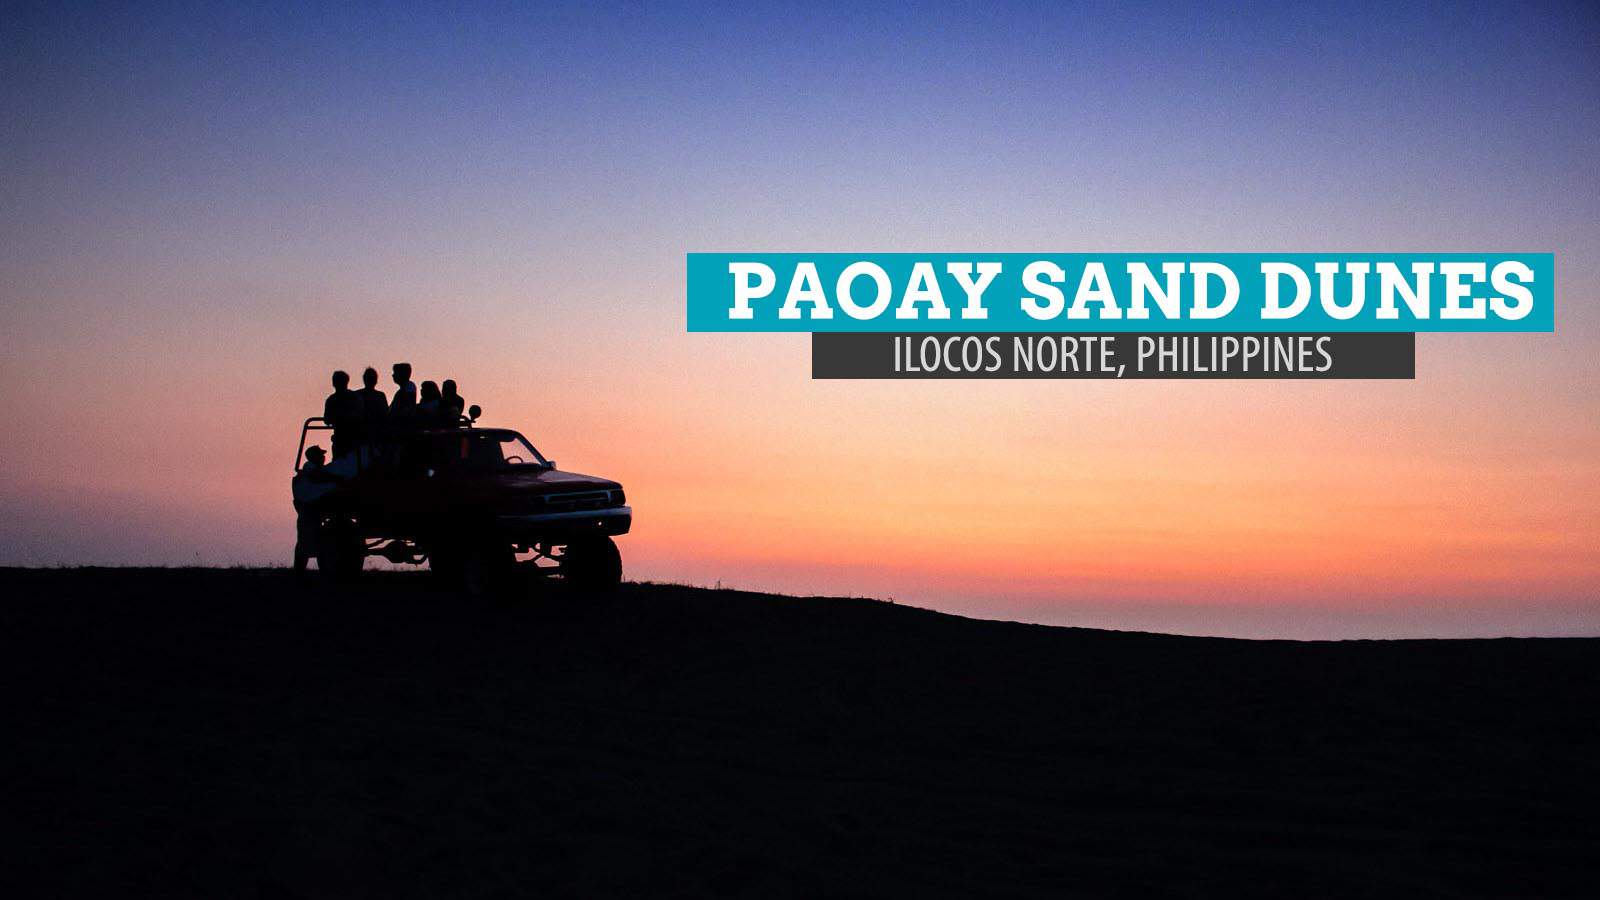 Paoay Sand Dunes: Getting Down and Dirty in Ilocos Norte, Philippines